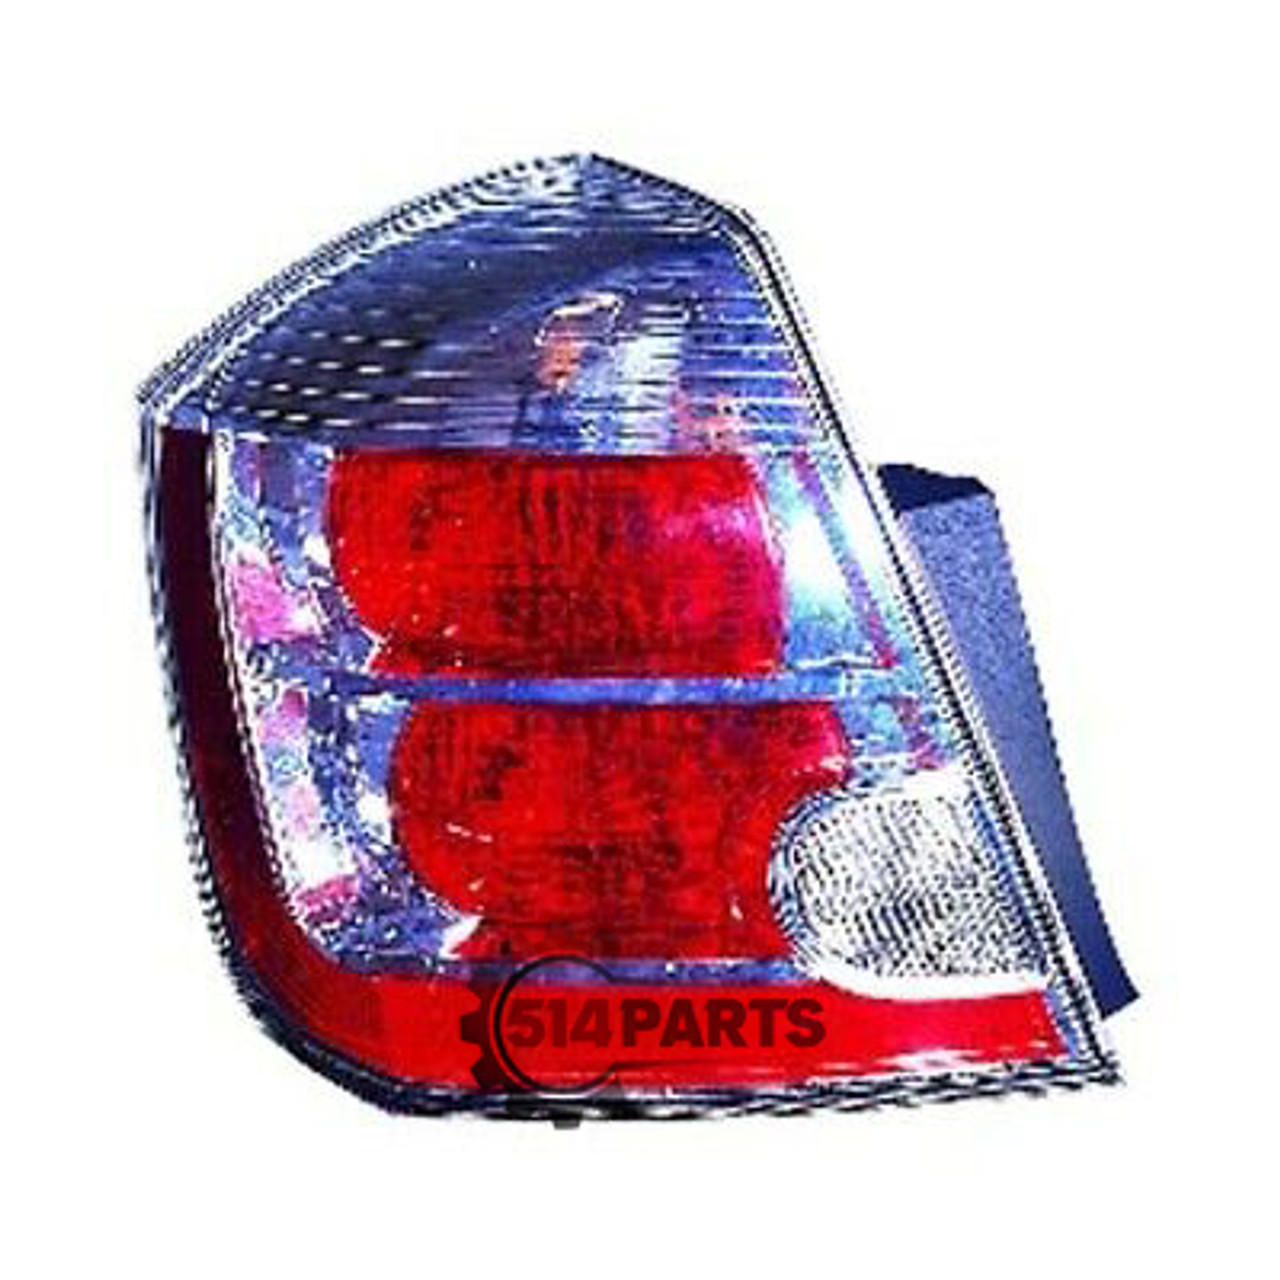 2007 - 2009 NISSAN SENTRA 2.0L TAIL LIGHTS High Quality - PHARES ARRIERE Haute Qualite